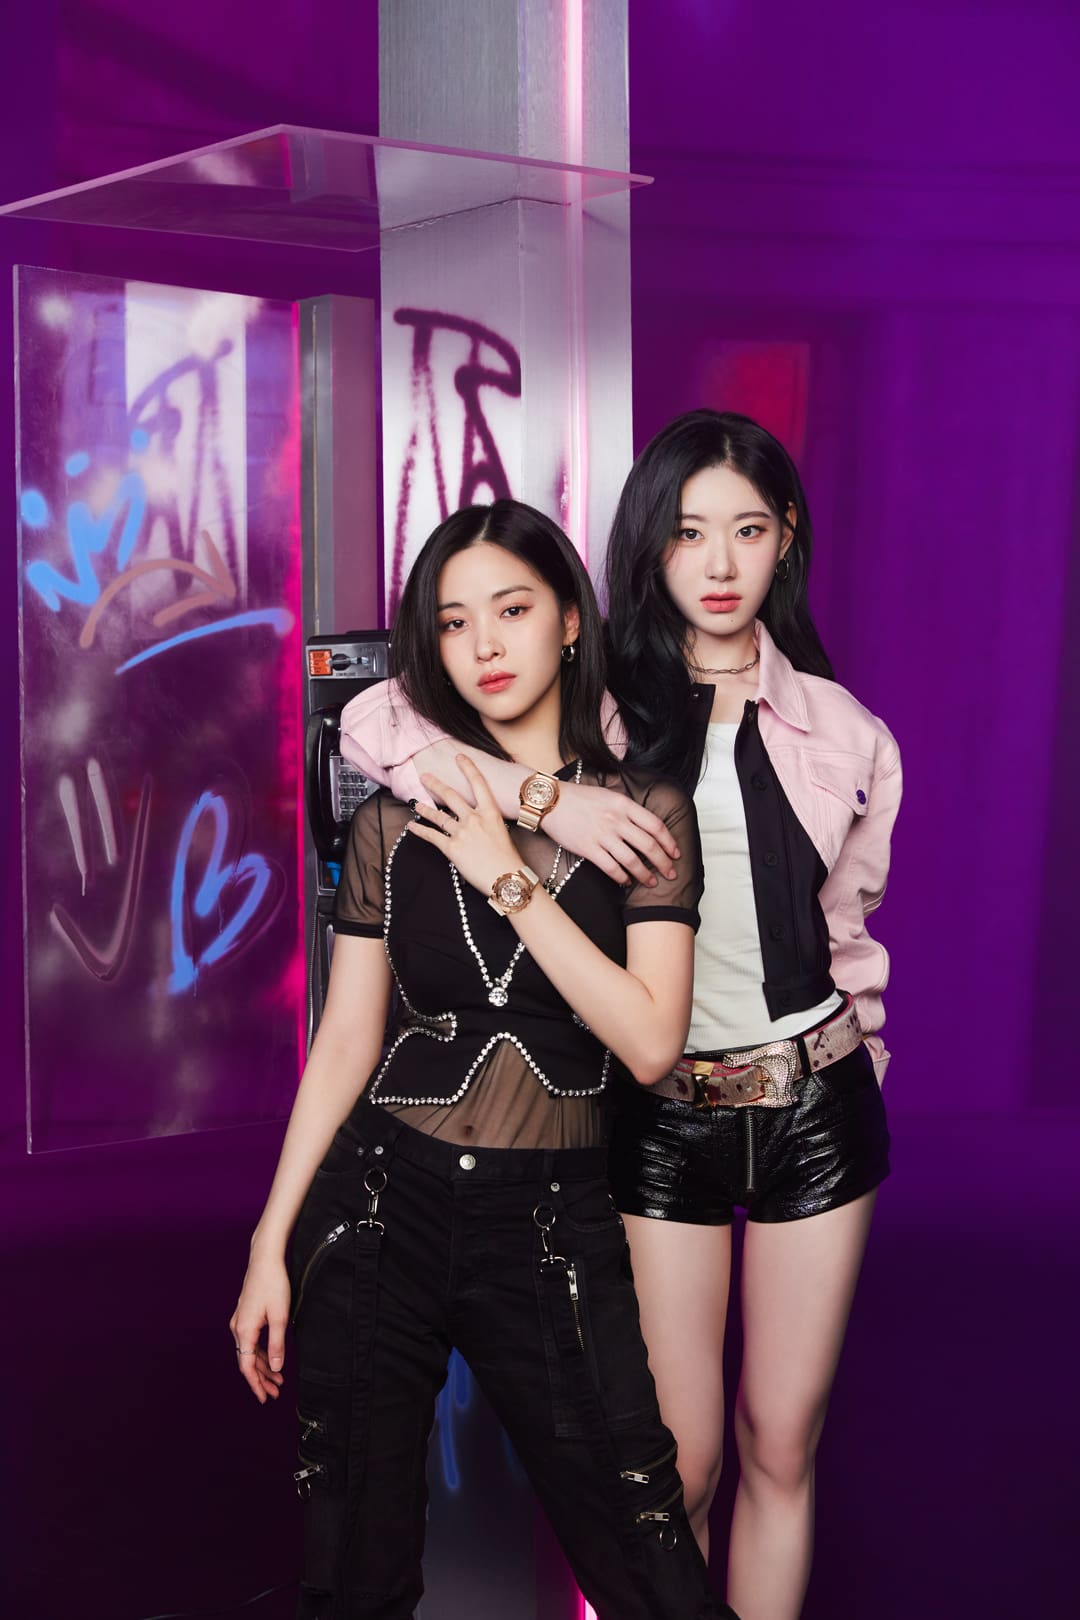 ITZY Band members posing in front of a purple backdrop